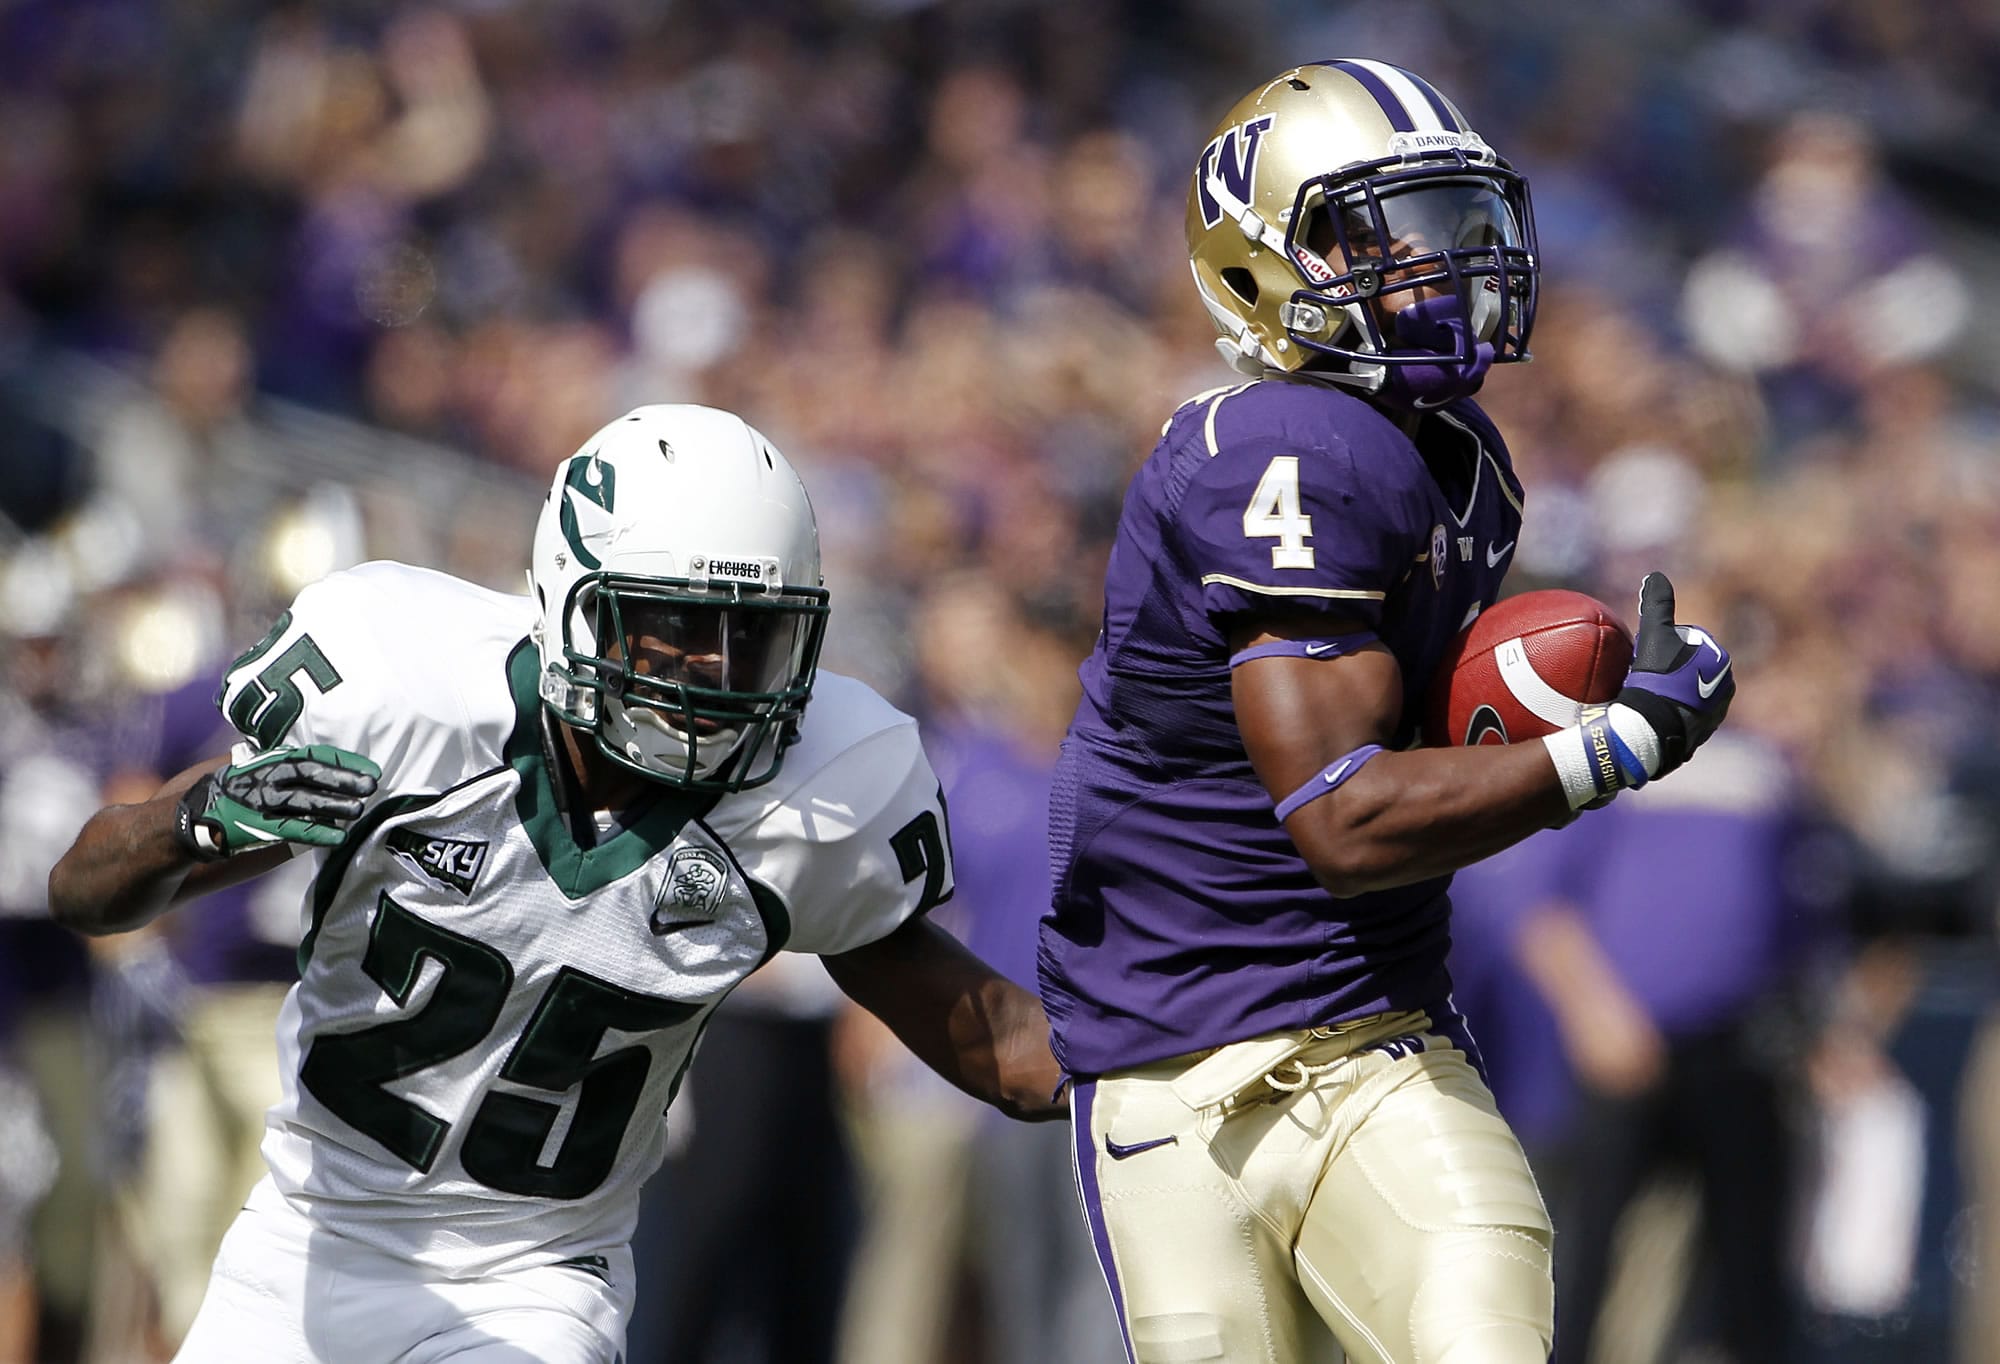 Portland State's Michael Williams (25) gives chase as Washington's Jaydon Mickens runs after a pass reception in the first half of an NCAA football game on Saturday, Sept. 15, 2012, in Seattle.